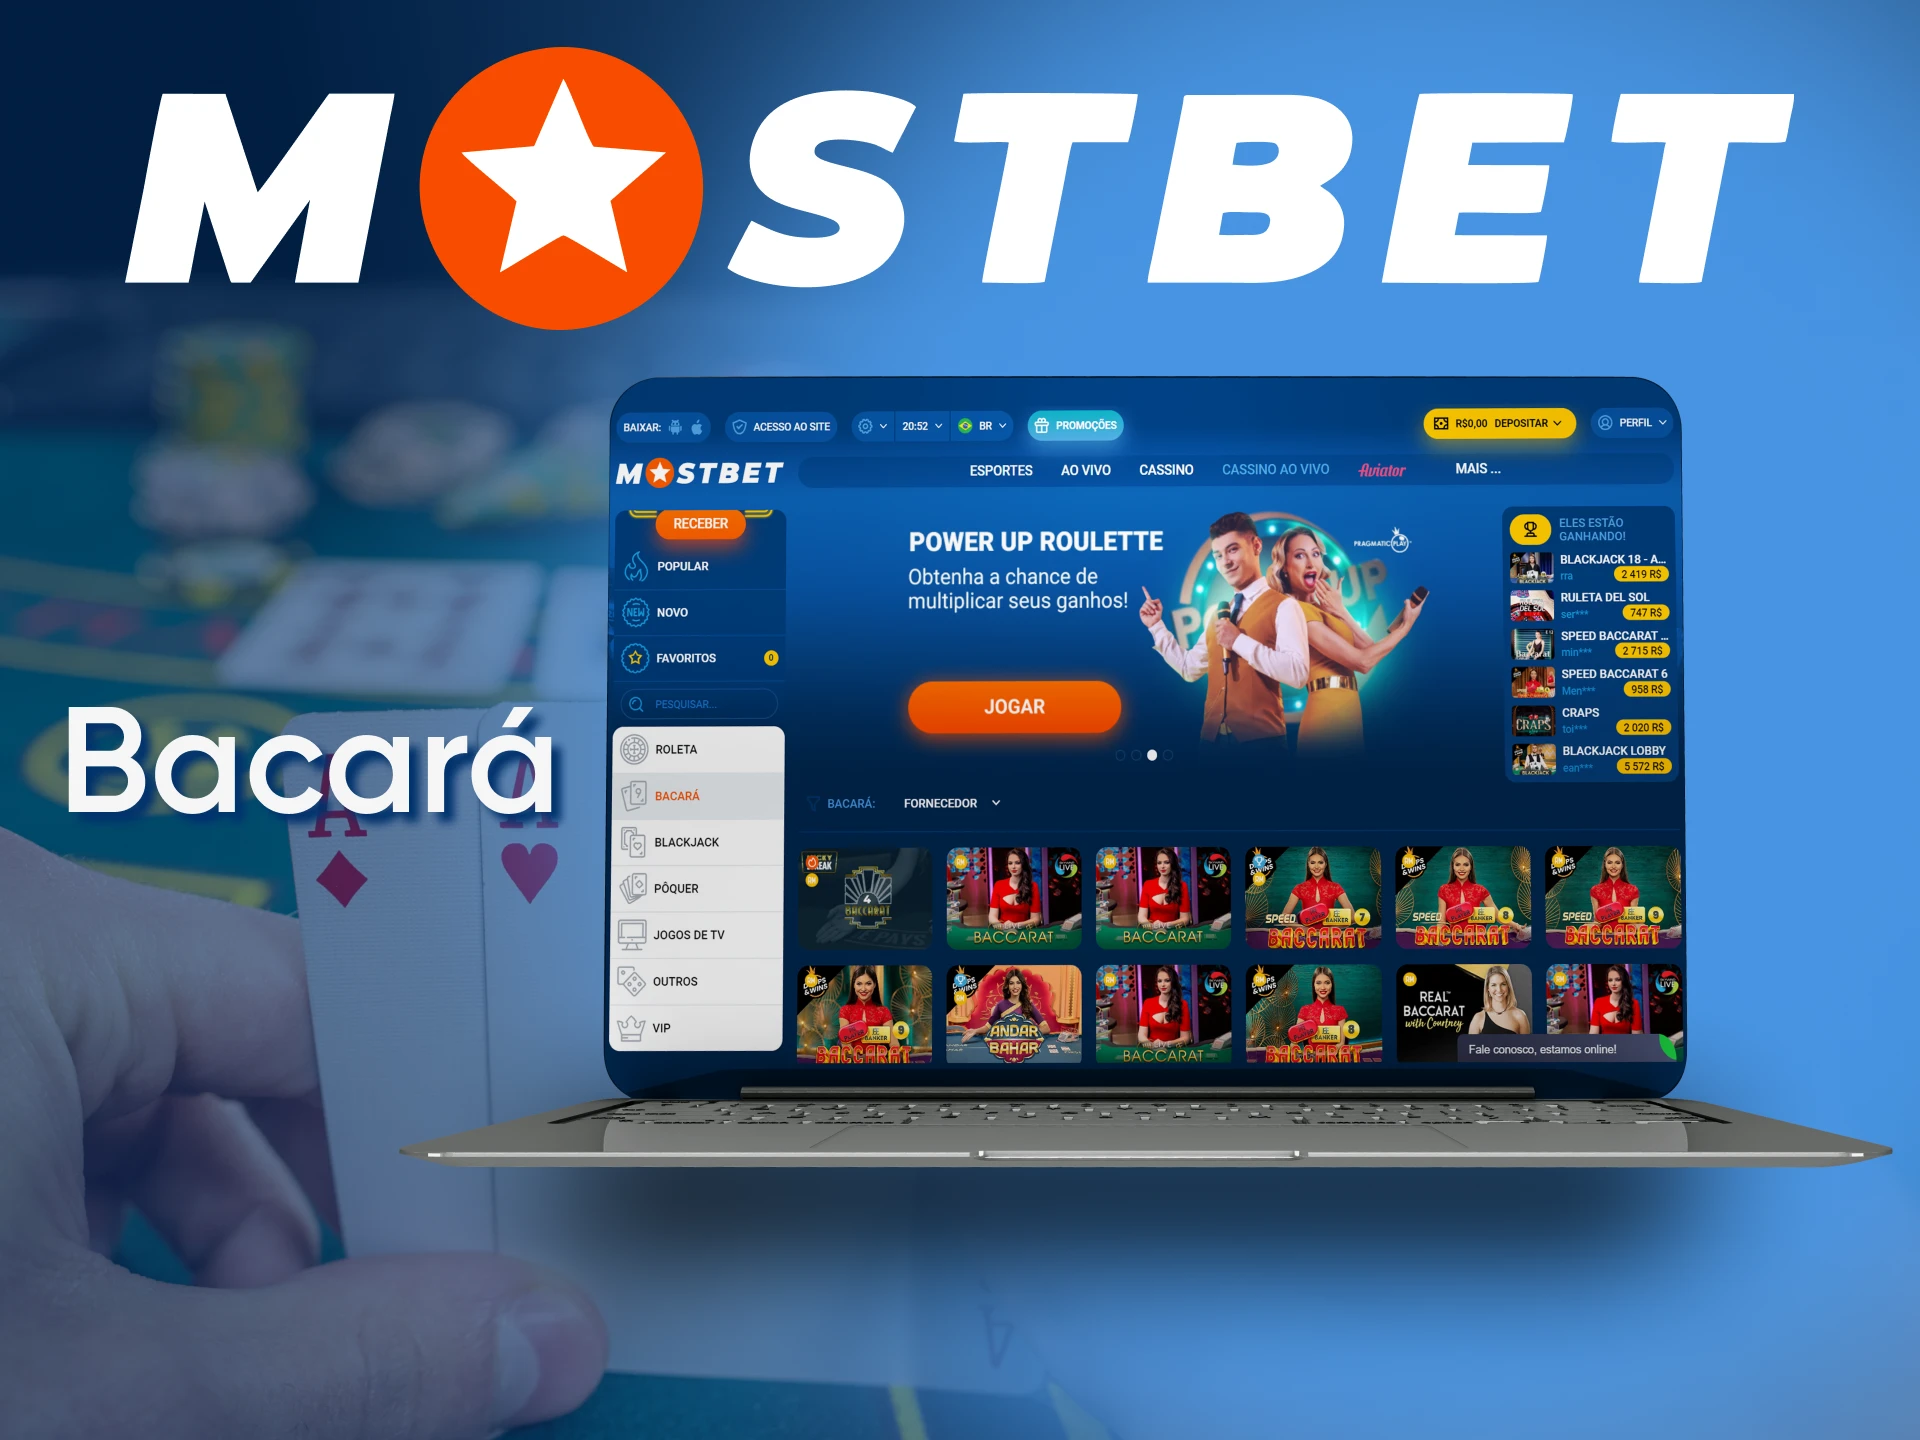 Bet on Mostbet Baccarat.